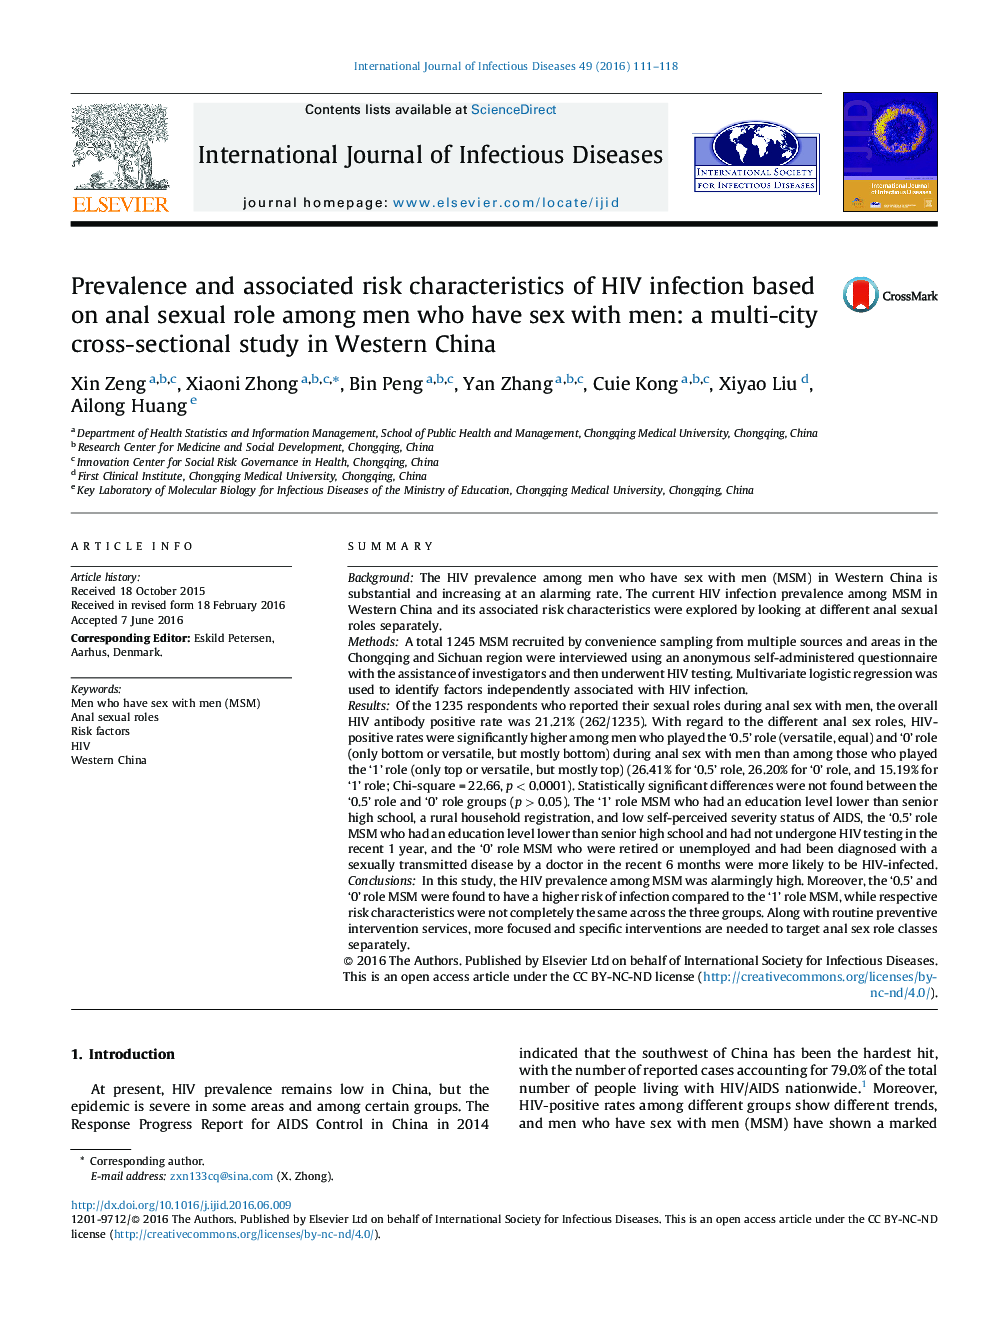 Prevalence and associated risk characteristics of HIV infection based on anal sexual role among men who have sex with men: a multi-city cross-sectional study in Western China